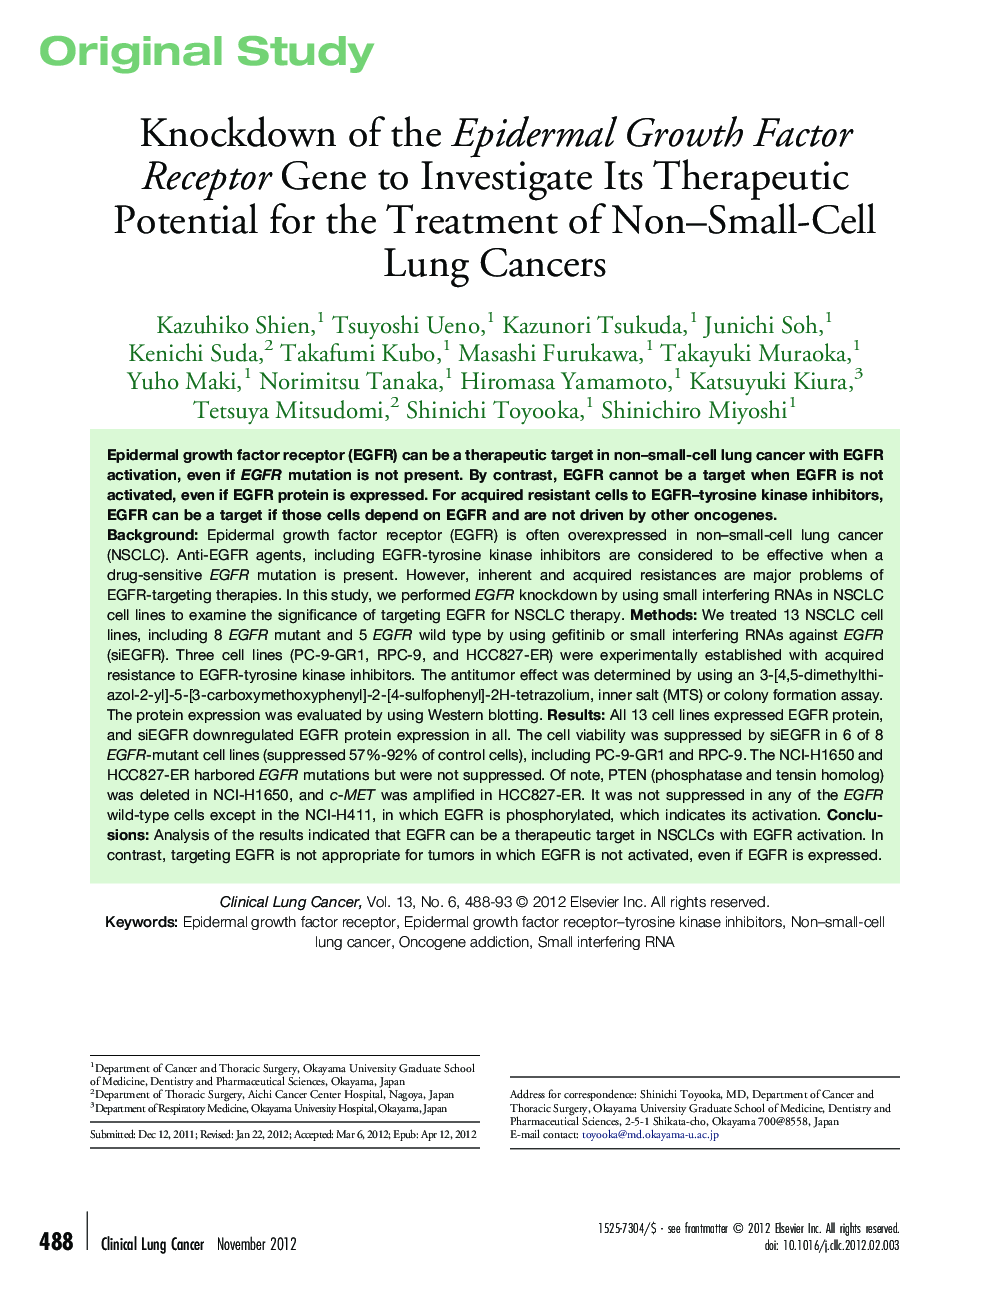 Knockdown of the Epidermal Growth Factor Receptor Gene to Investigate Its Therapeutic Potential for the Treatment of Non–Small-Cell Lung Cancers